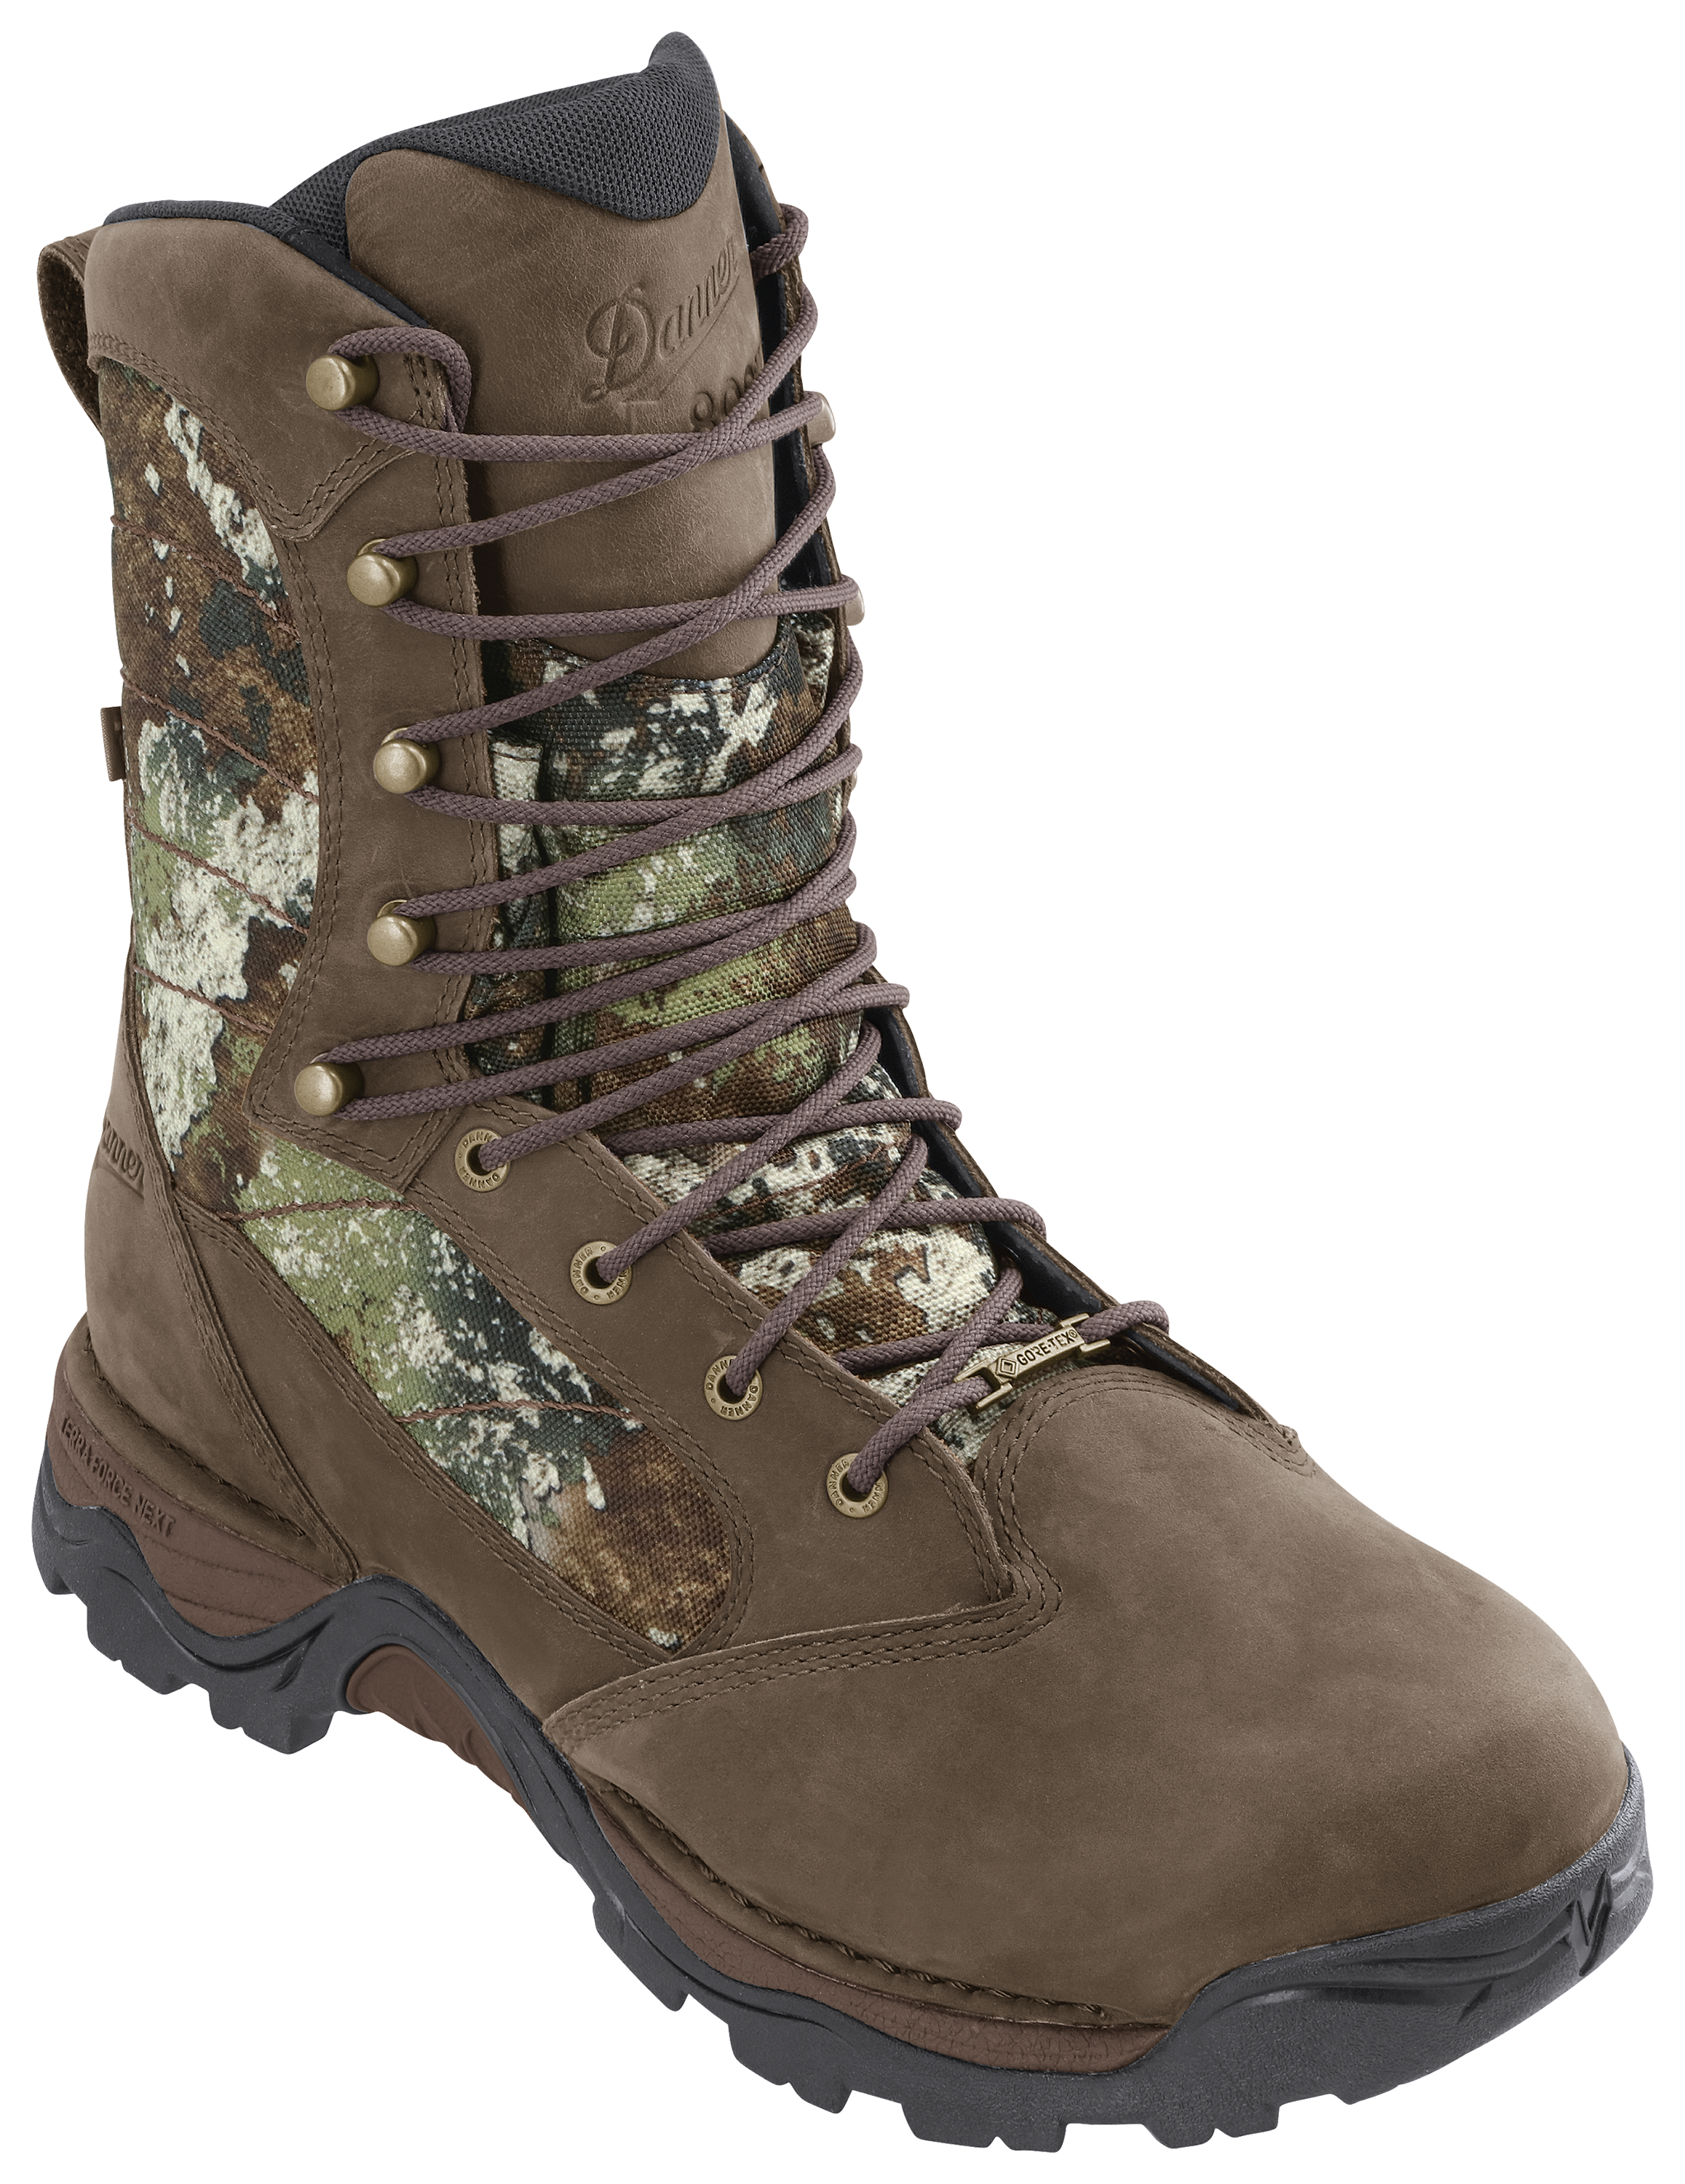 Danner Pronghorn 800 TrueTimber Strata Insulated GORE-TEX Hunting Boots for Men - 9.5M